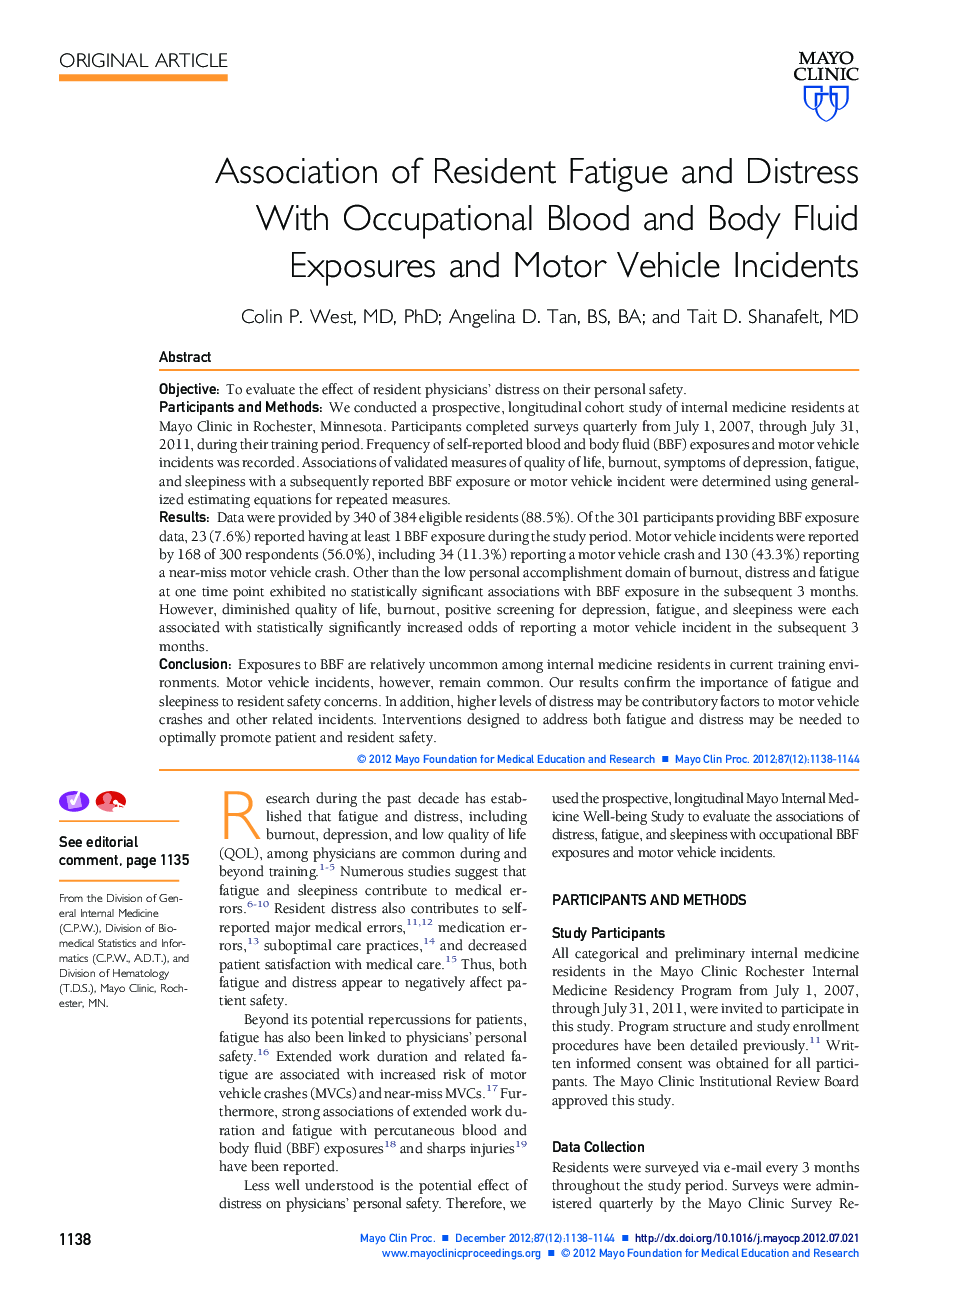 Association of Resident Fatigue and Distress With Occupational Blood and Body Fluid Exposures and Motor Vehicle Incidents